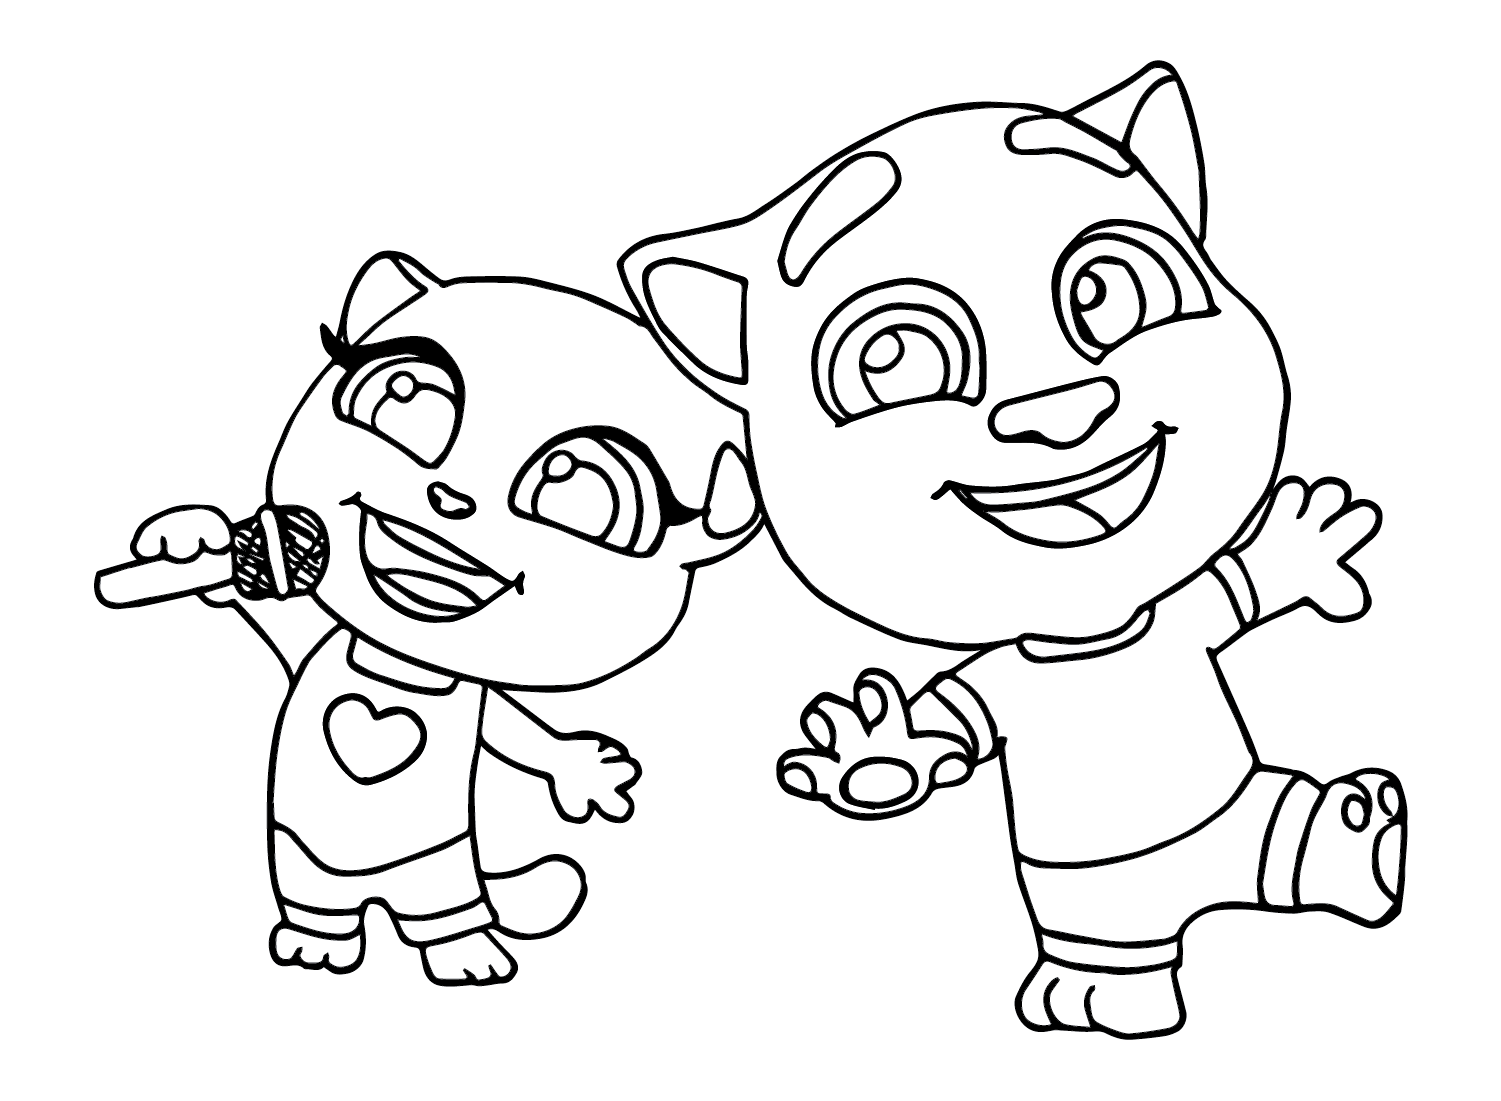 Talking Tom and Angela Sing Coloring Page